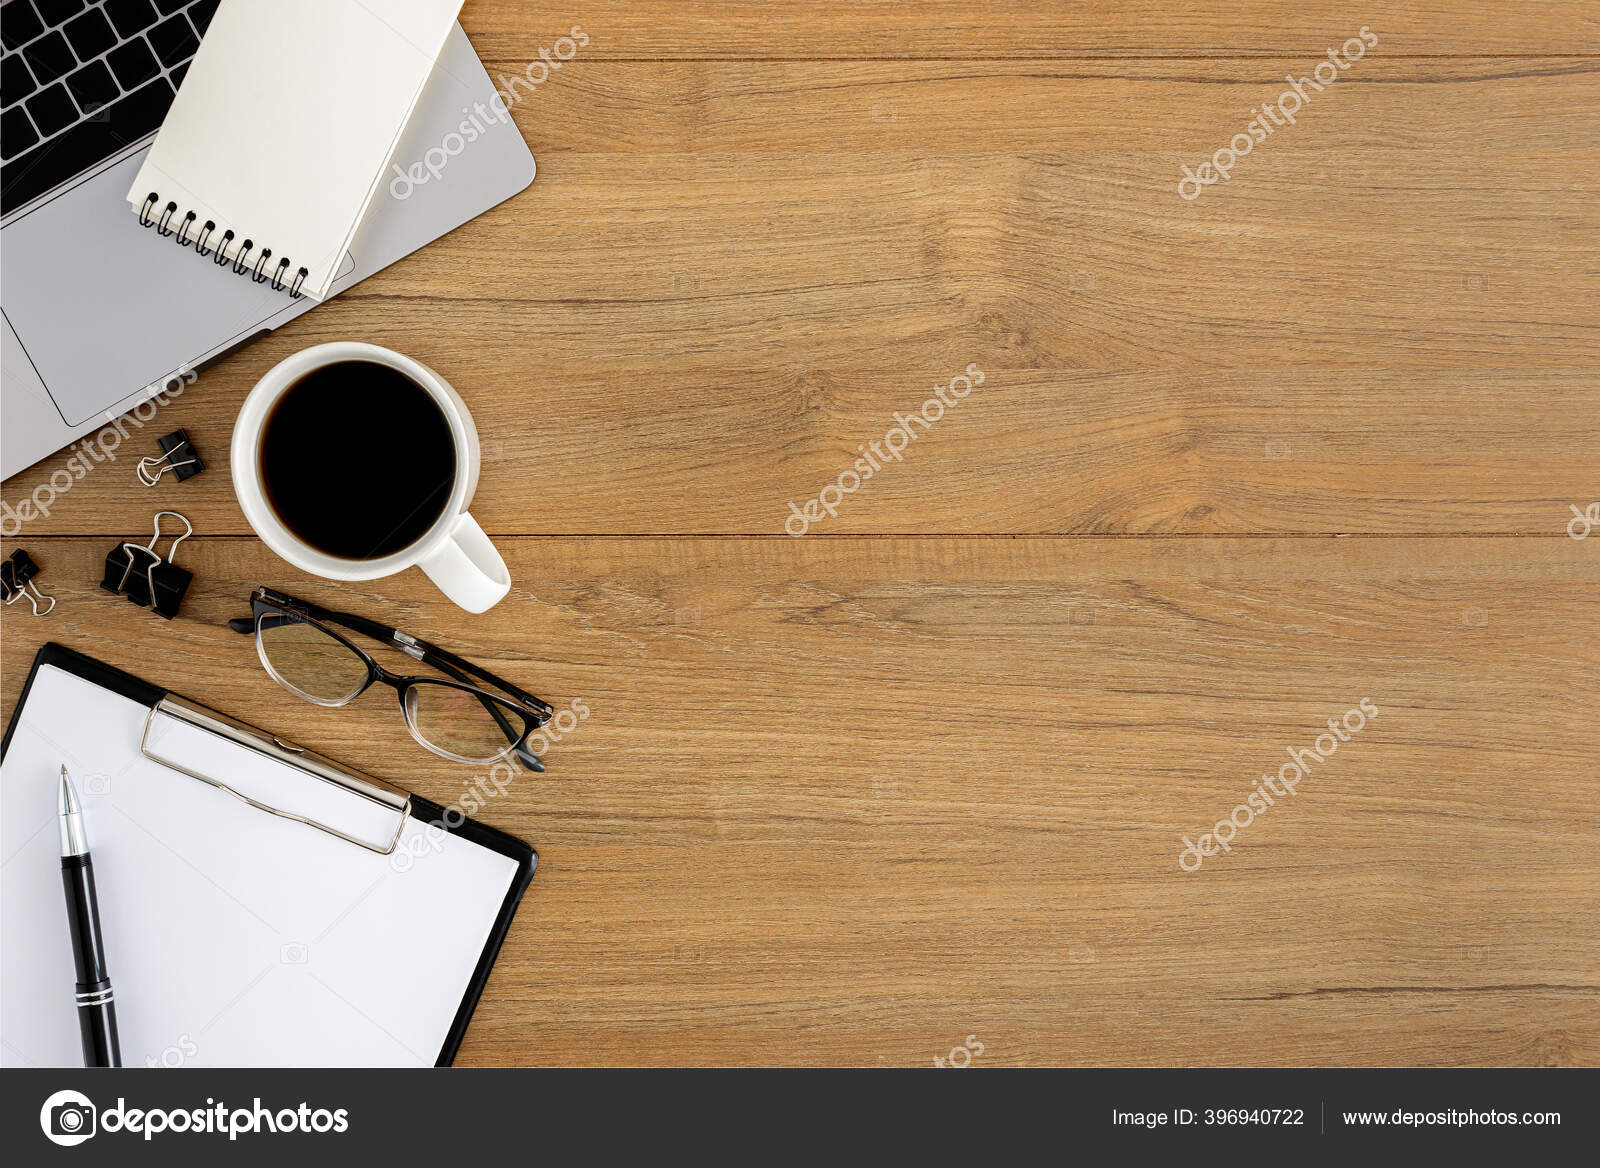 Top view of working table with blank paper notebook, cup of coffee and  eyeglasess., Stock image